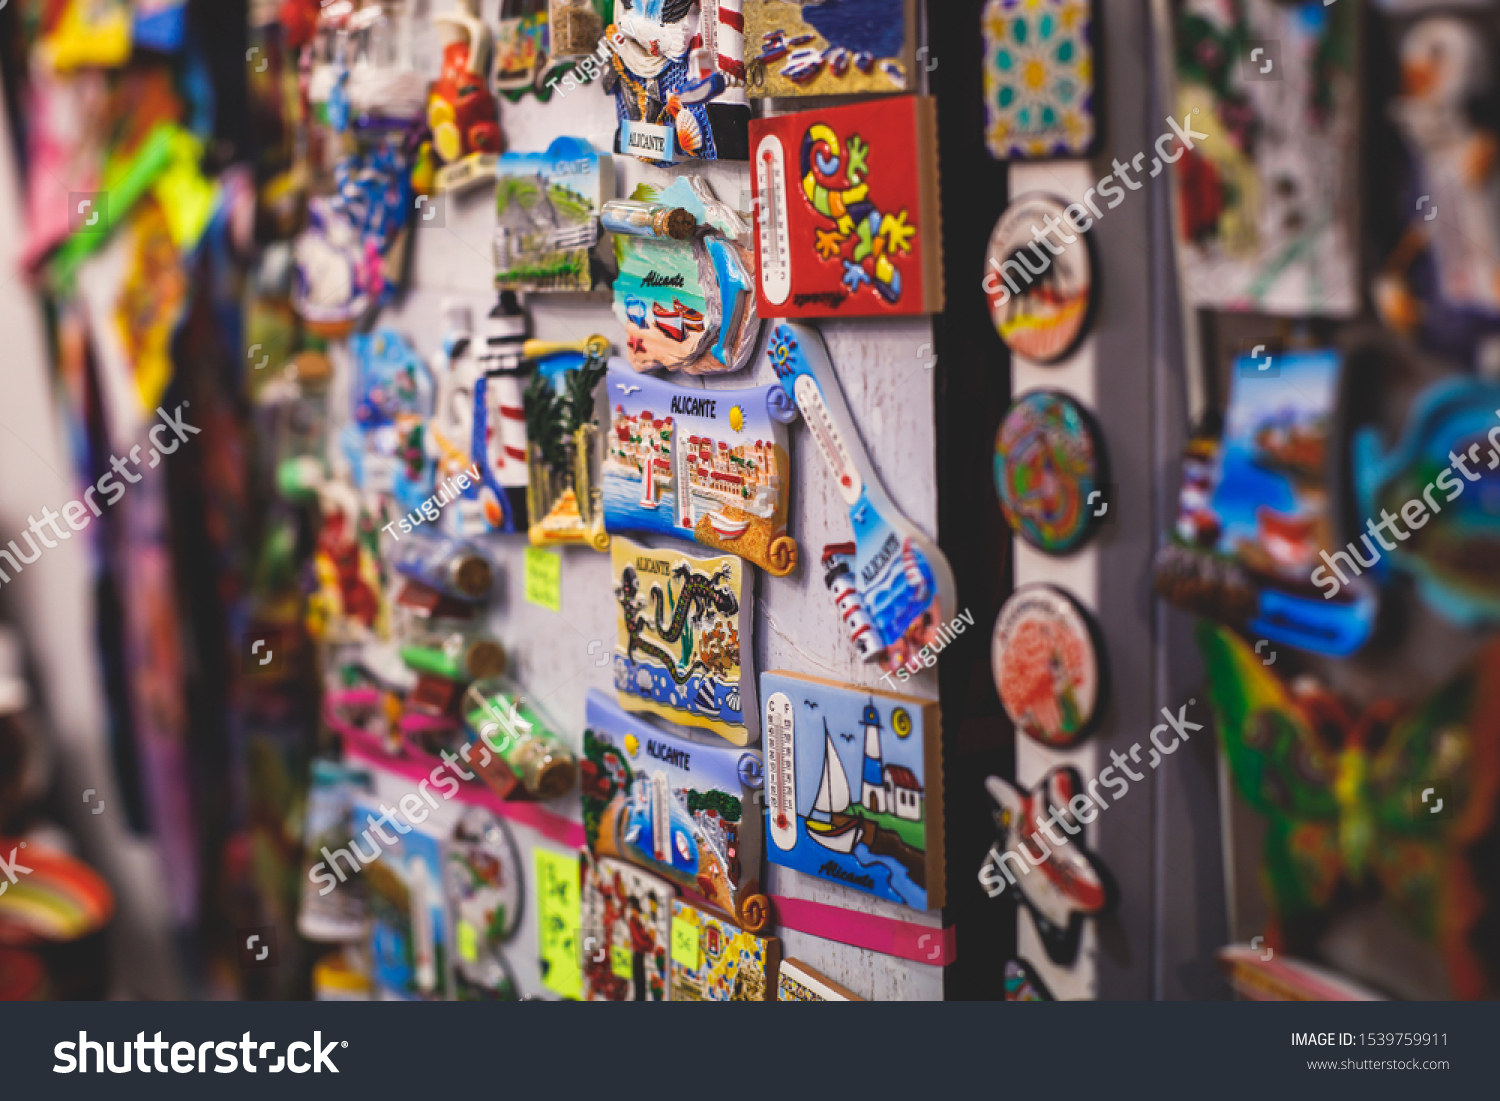 View of traditional tourist souvenirs and gifts from Spain, Alicante, Valencia with toys, bull figures, flamenco dancer dolls, fridge magnets with and key ring keychain, in local vendor souvenir shop
 #1539759911